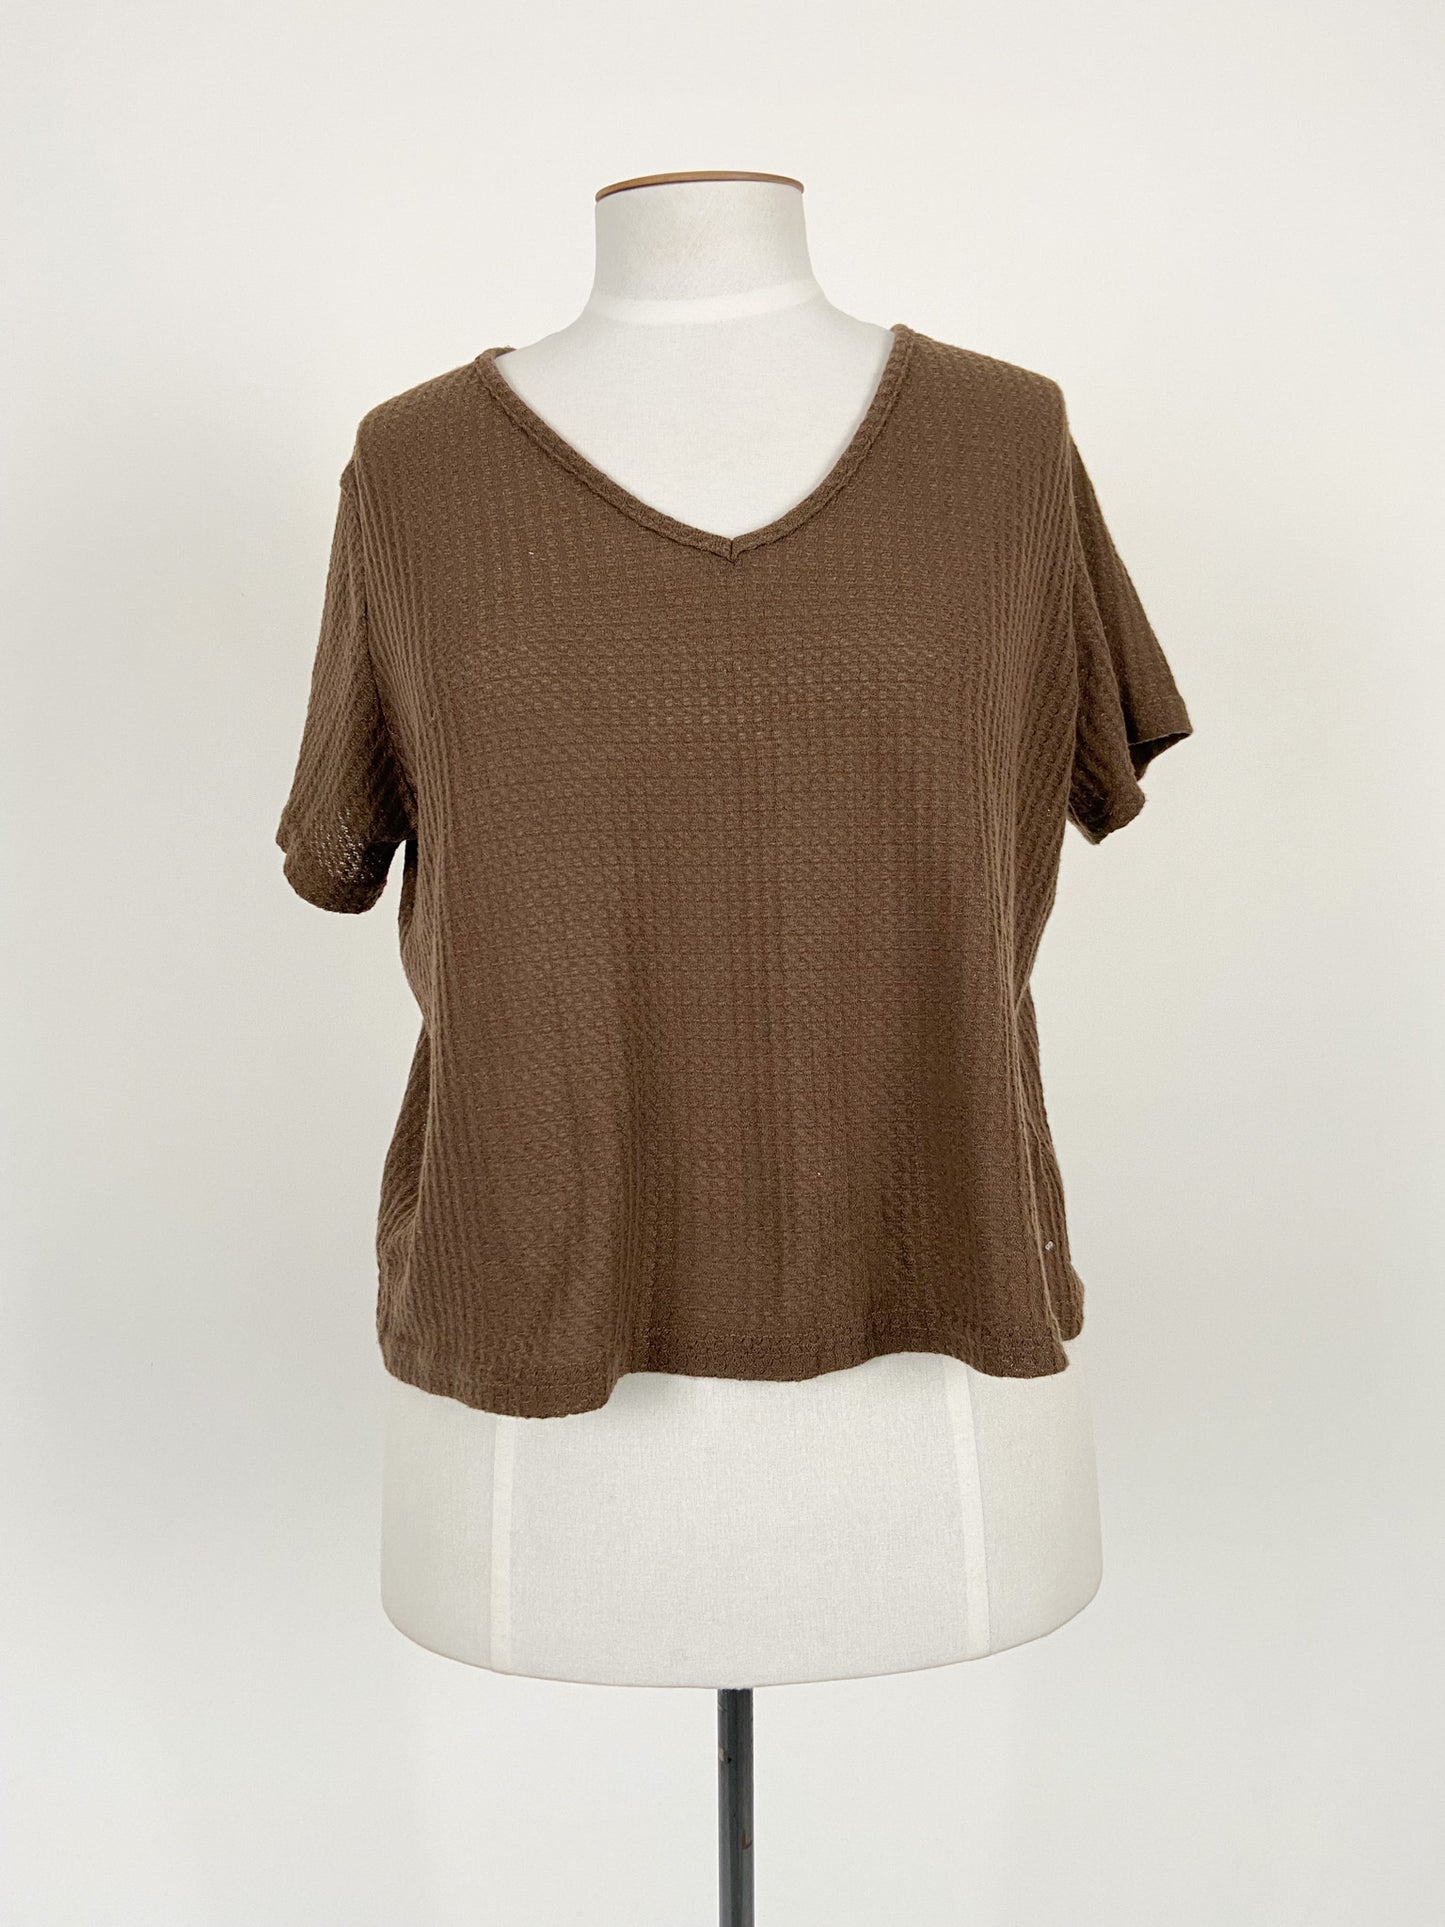 Shein | Brown Casual Top | Size L